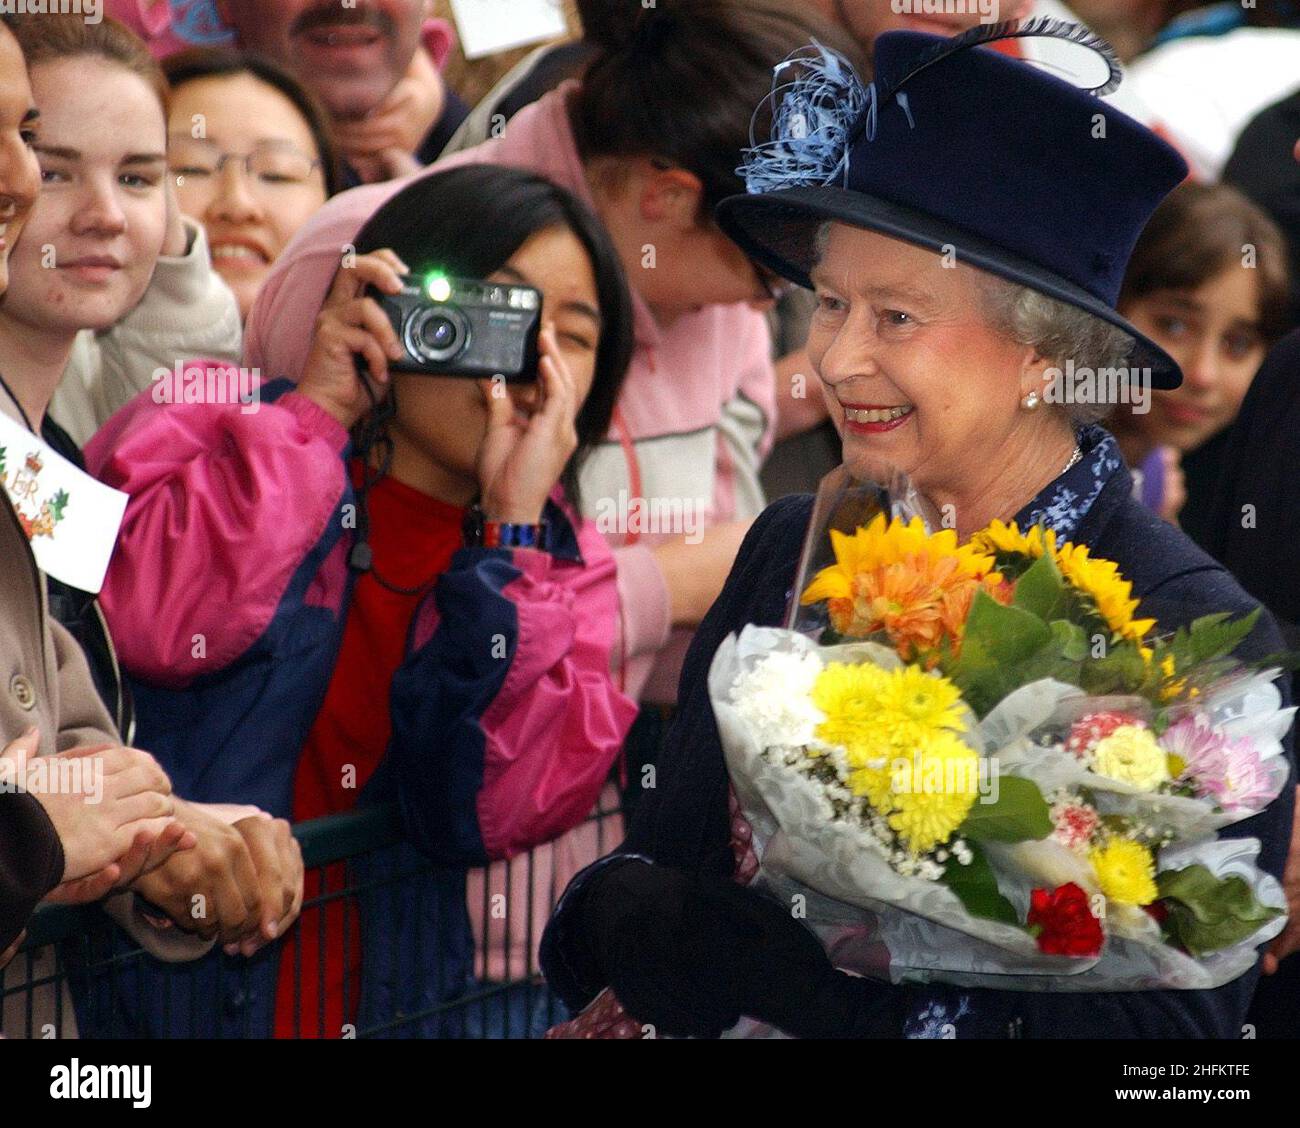 File photo dated 07/10/2002 of Queen Elizabeth II meeting wellwishers during a walkabout at the University of British Columbia in Canada. Members of the public are being asked to submit their own snapshots of the royal family, with the chance to see them exhibited alongside some of the most legendary royal images in history. Issue date: Monday January 17, 2022. Stock Photo